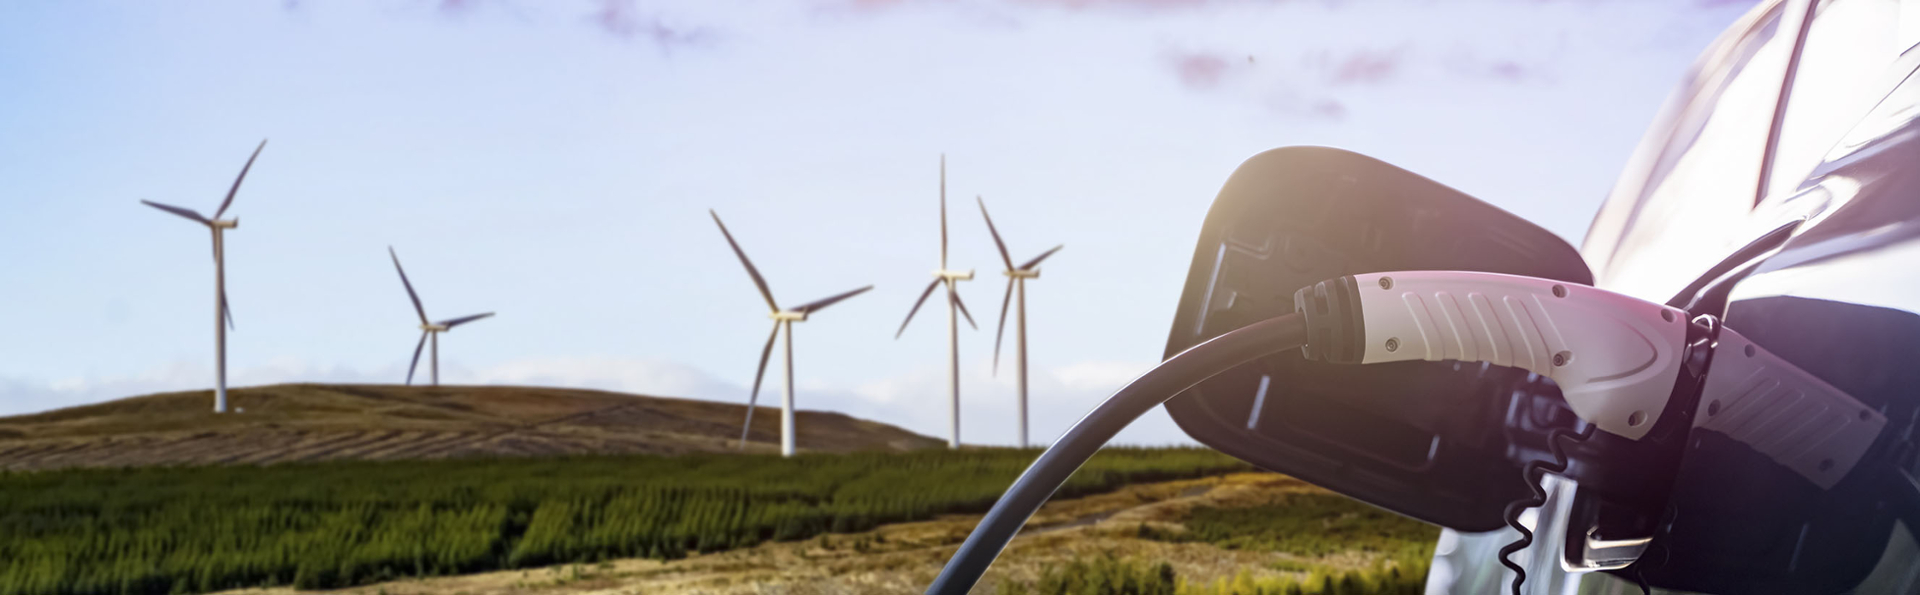 Stock image of electric vehicle and wind farm